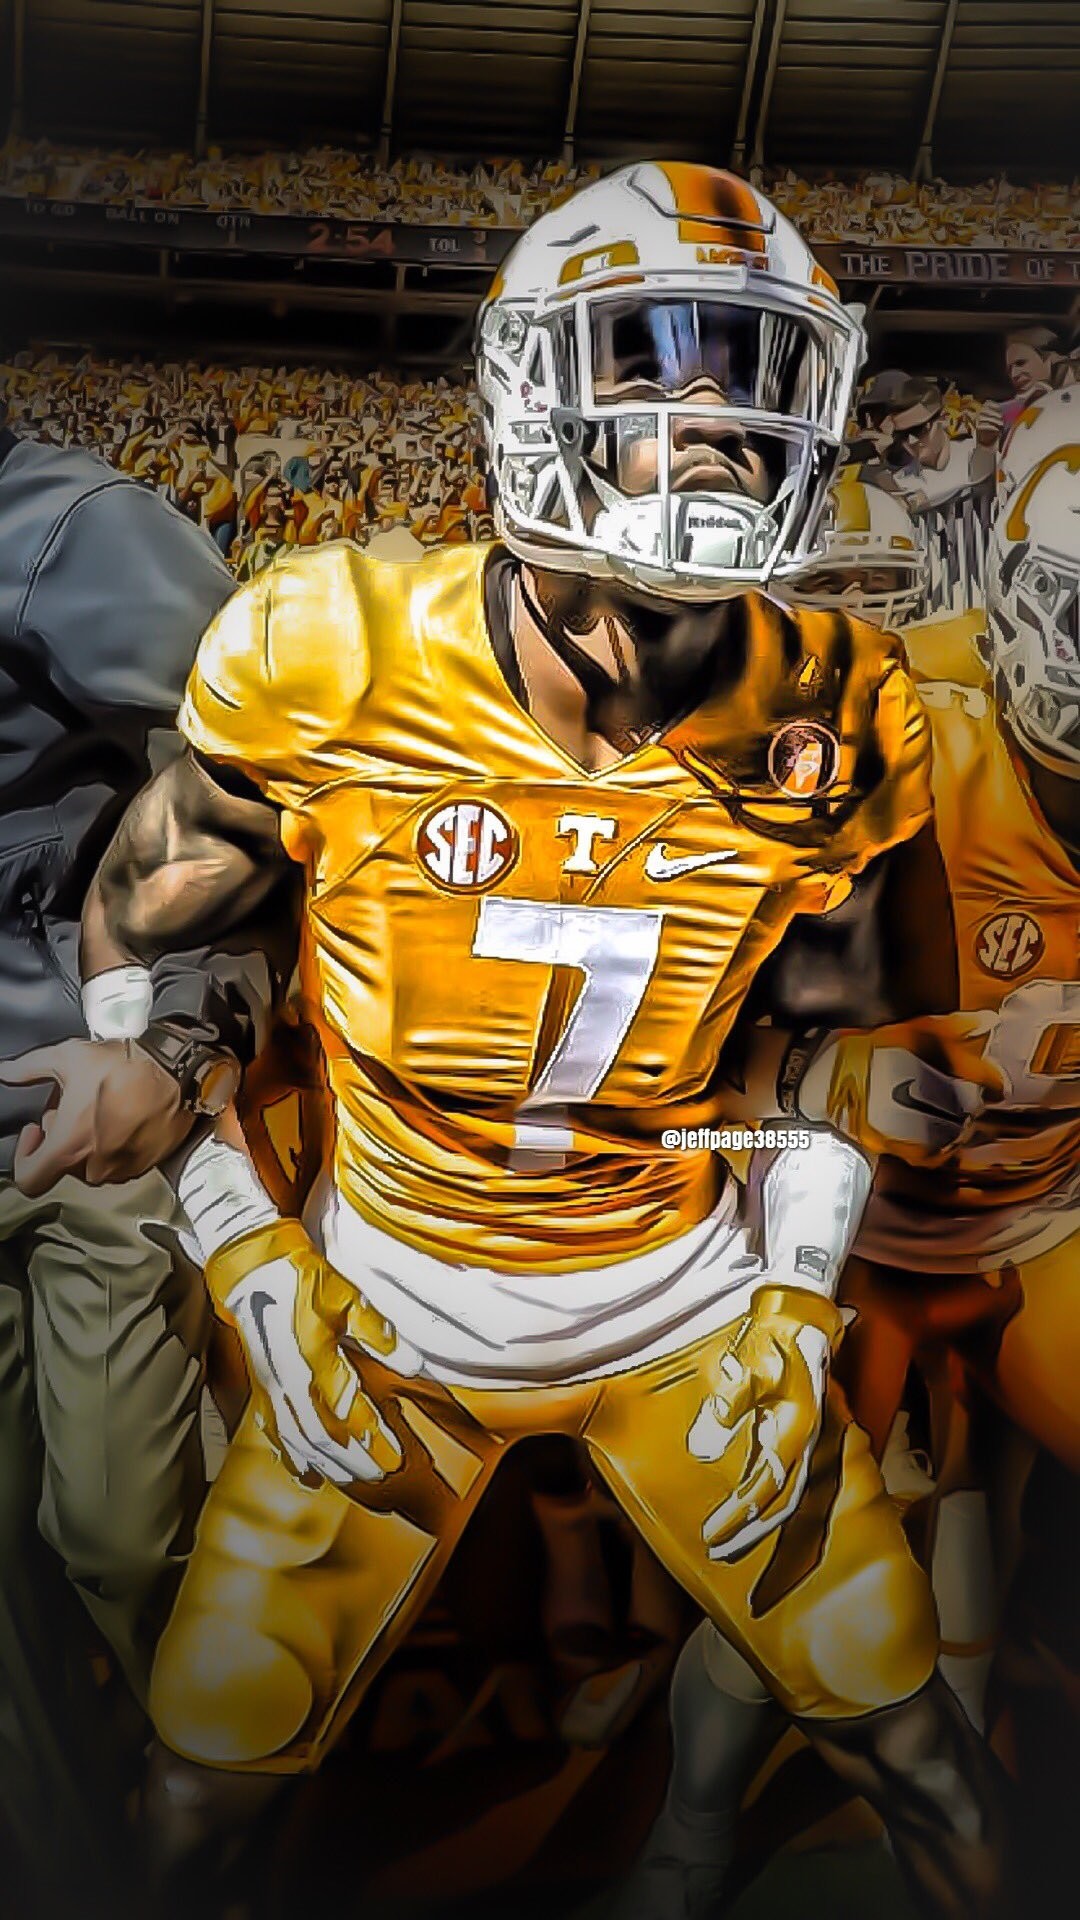 Jeff Page On Twitter Quot Cam Sutton Wecoming Wallpaper Sized For Iphone 6 Use Amp Rt If You Like Orangeswarm Team120 25points Go Vols 1080x1920